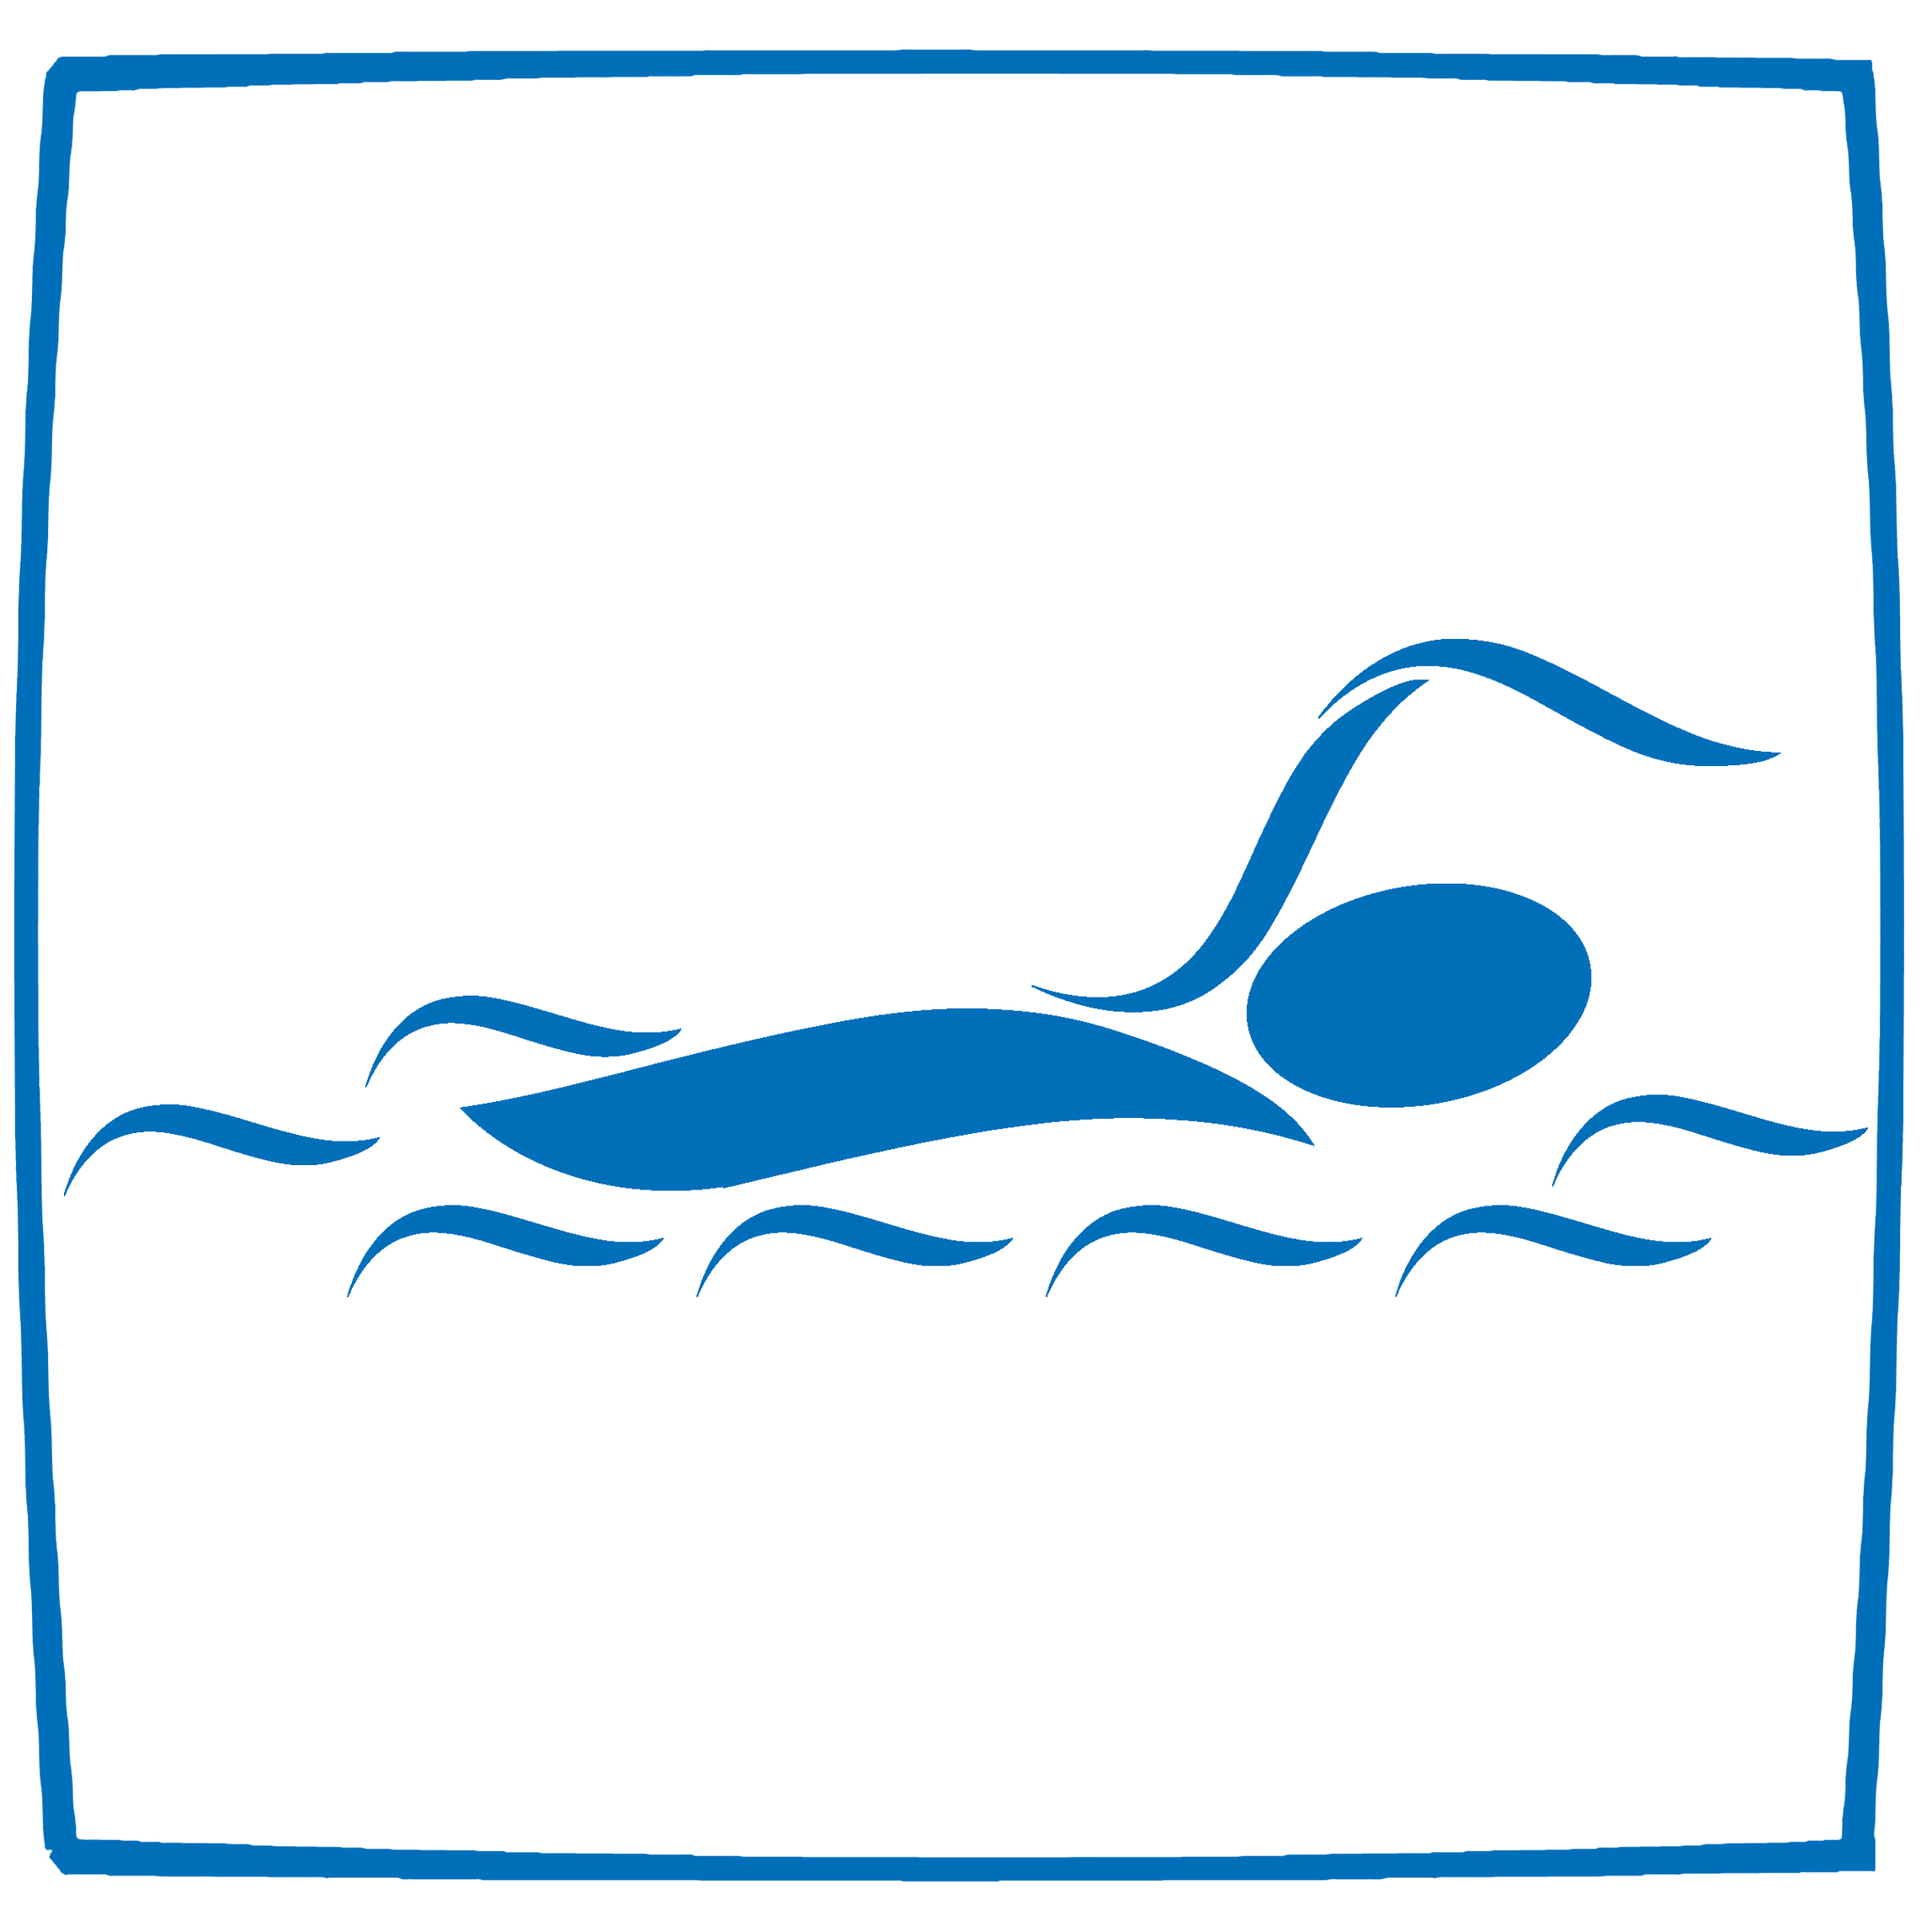 Olympic Swimming Logo Clipart - Free to use Clip Art Resource